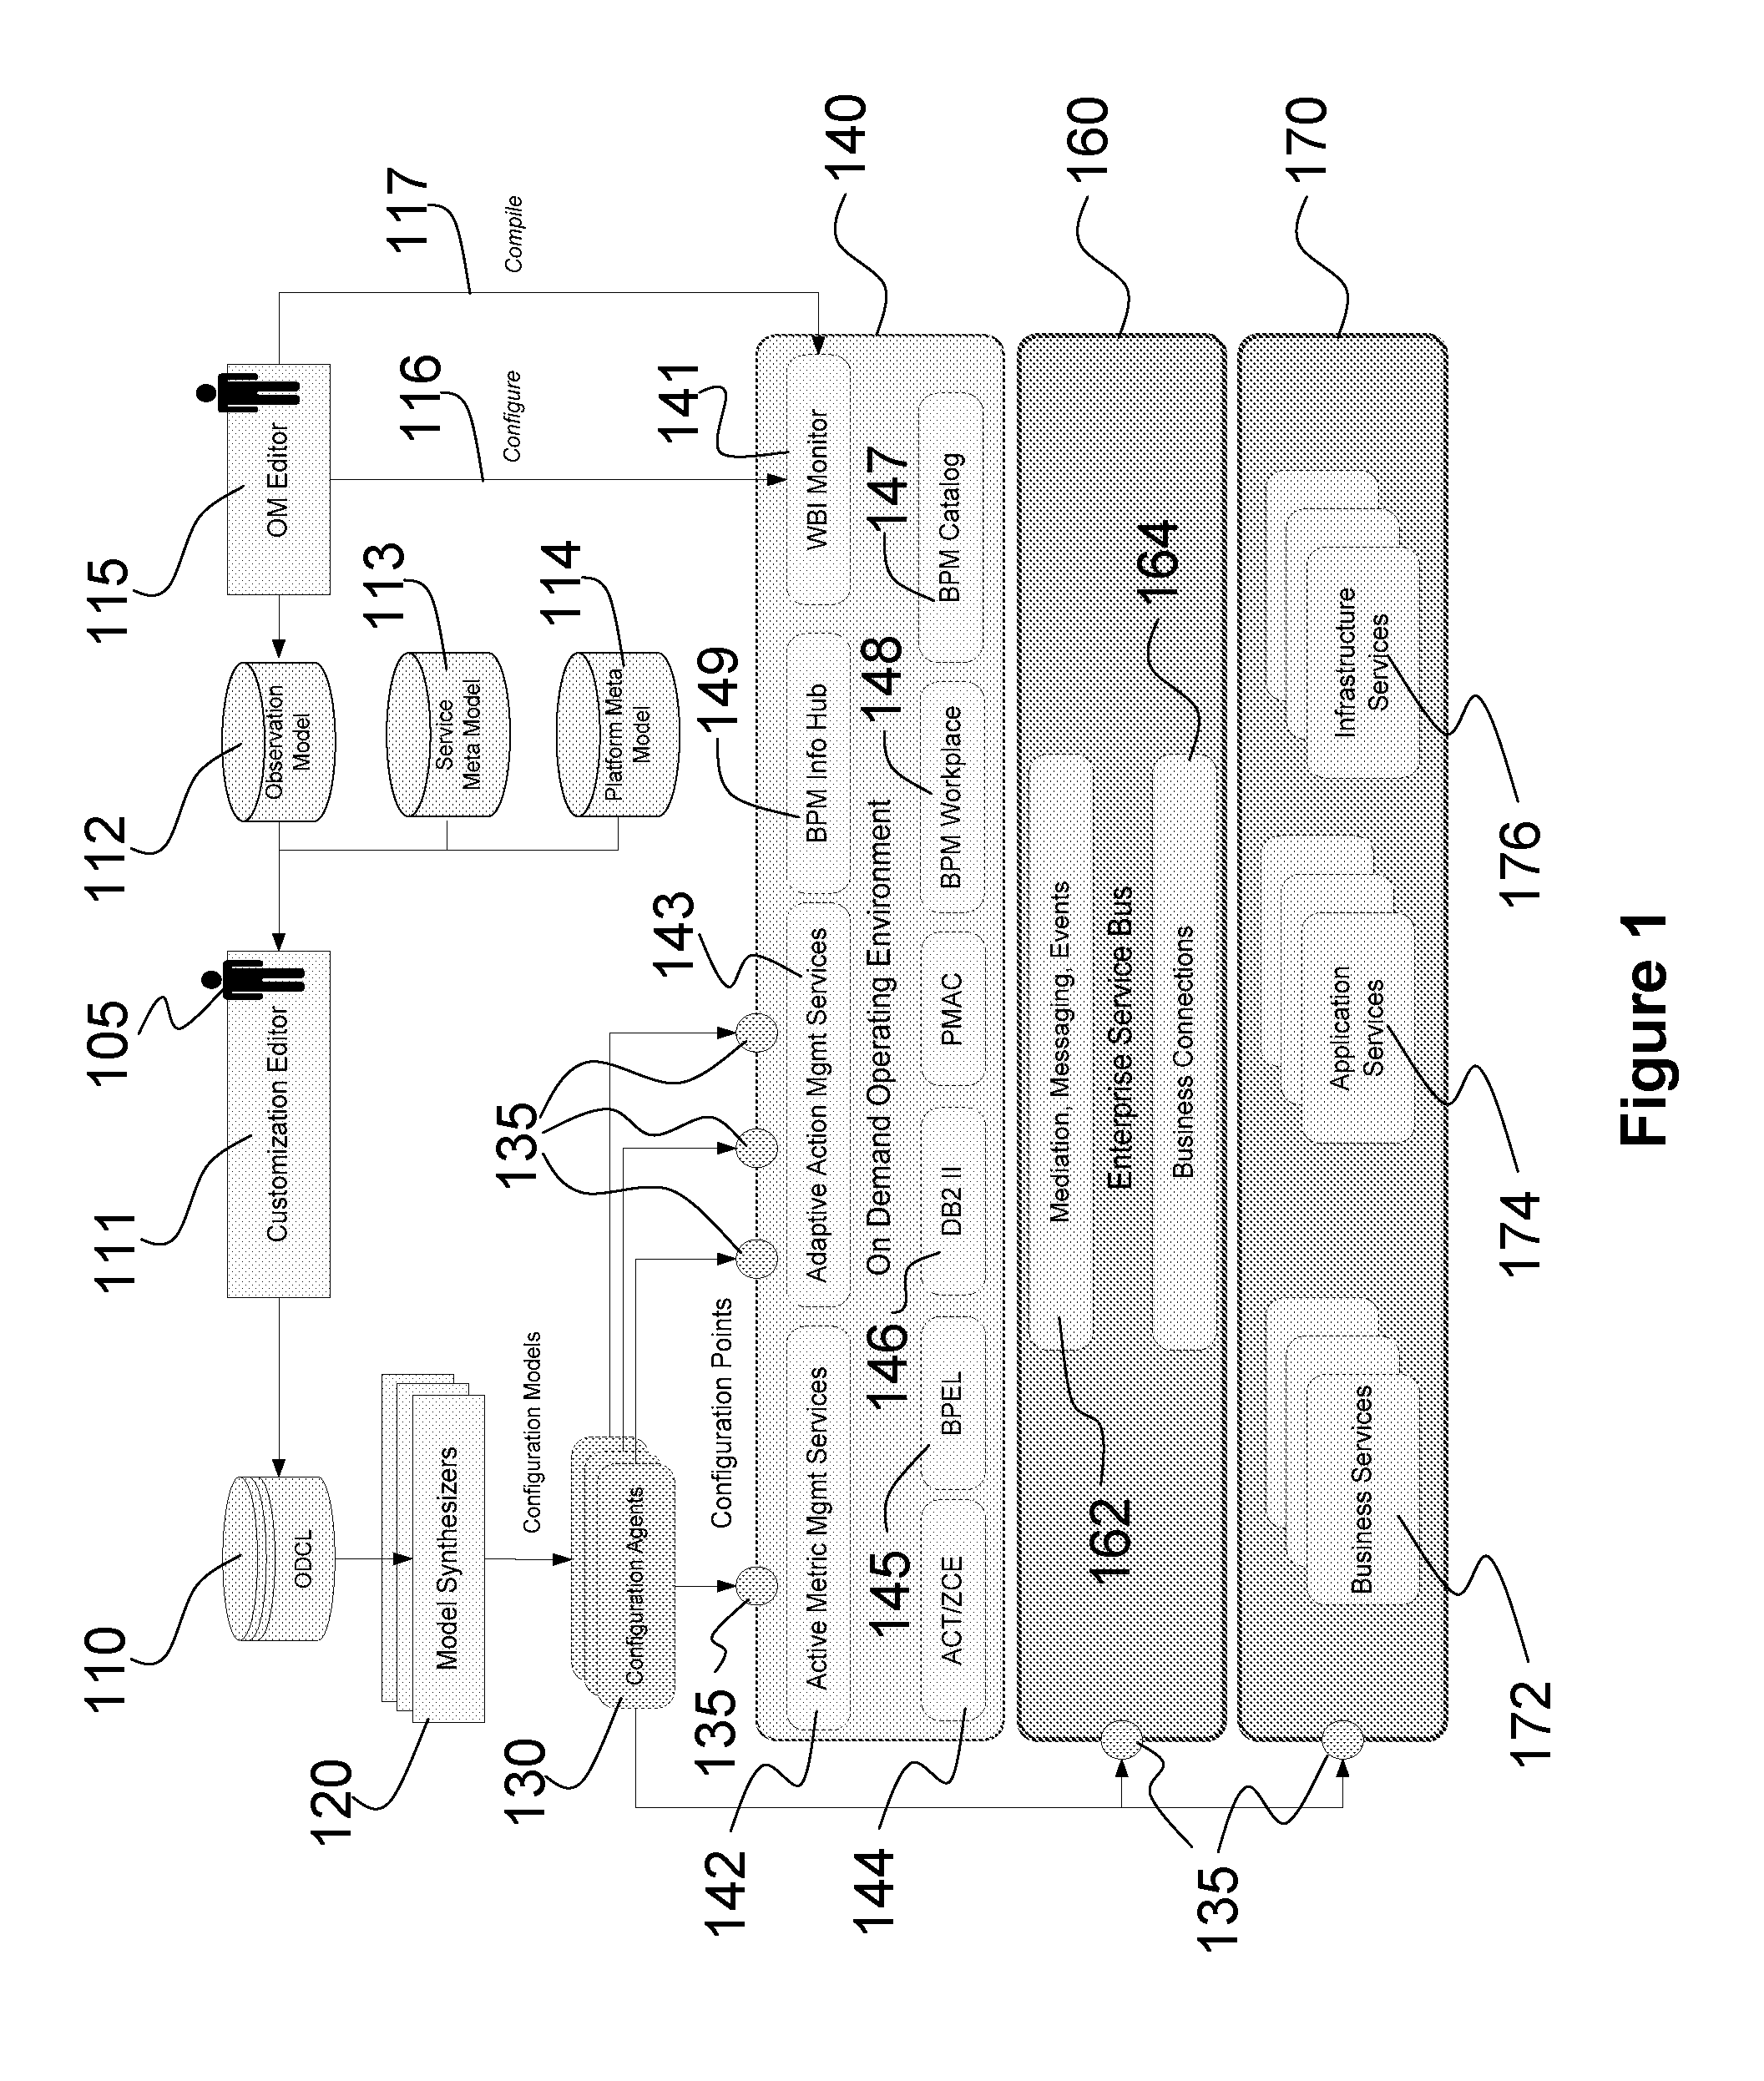 Method and apparatus for dynamic configuration of an on-demand operating environment